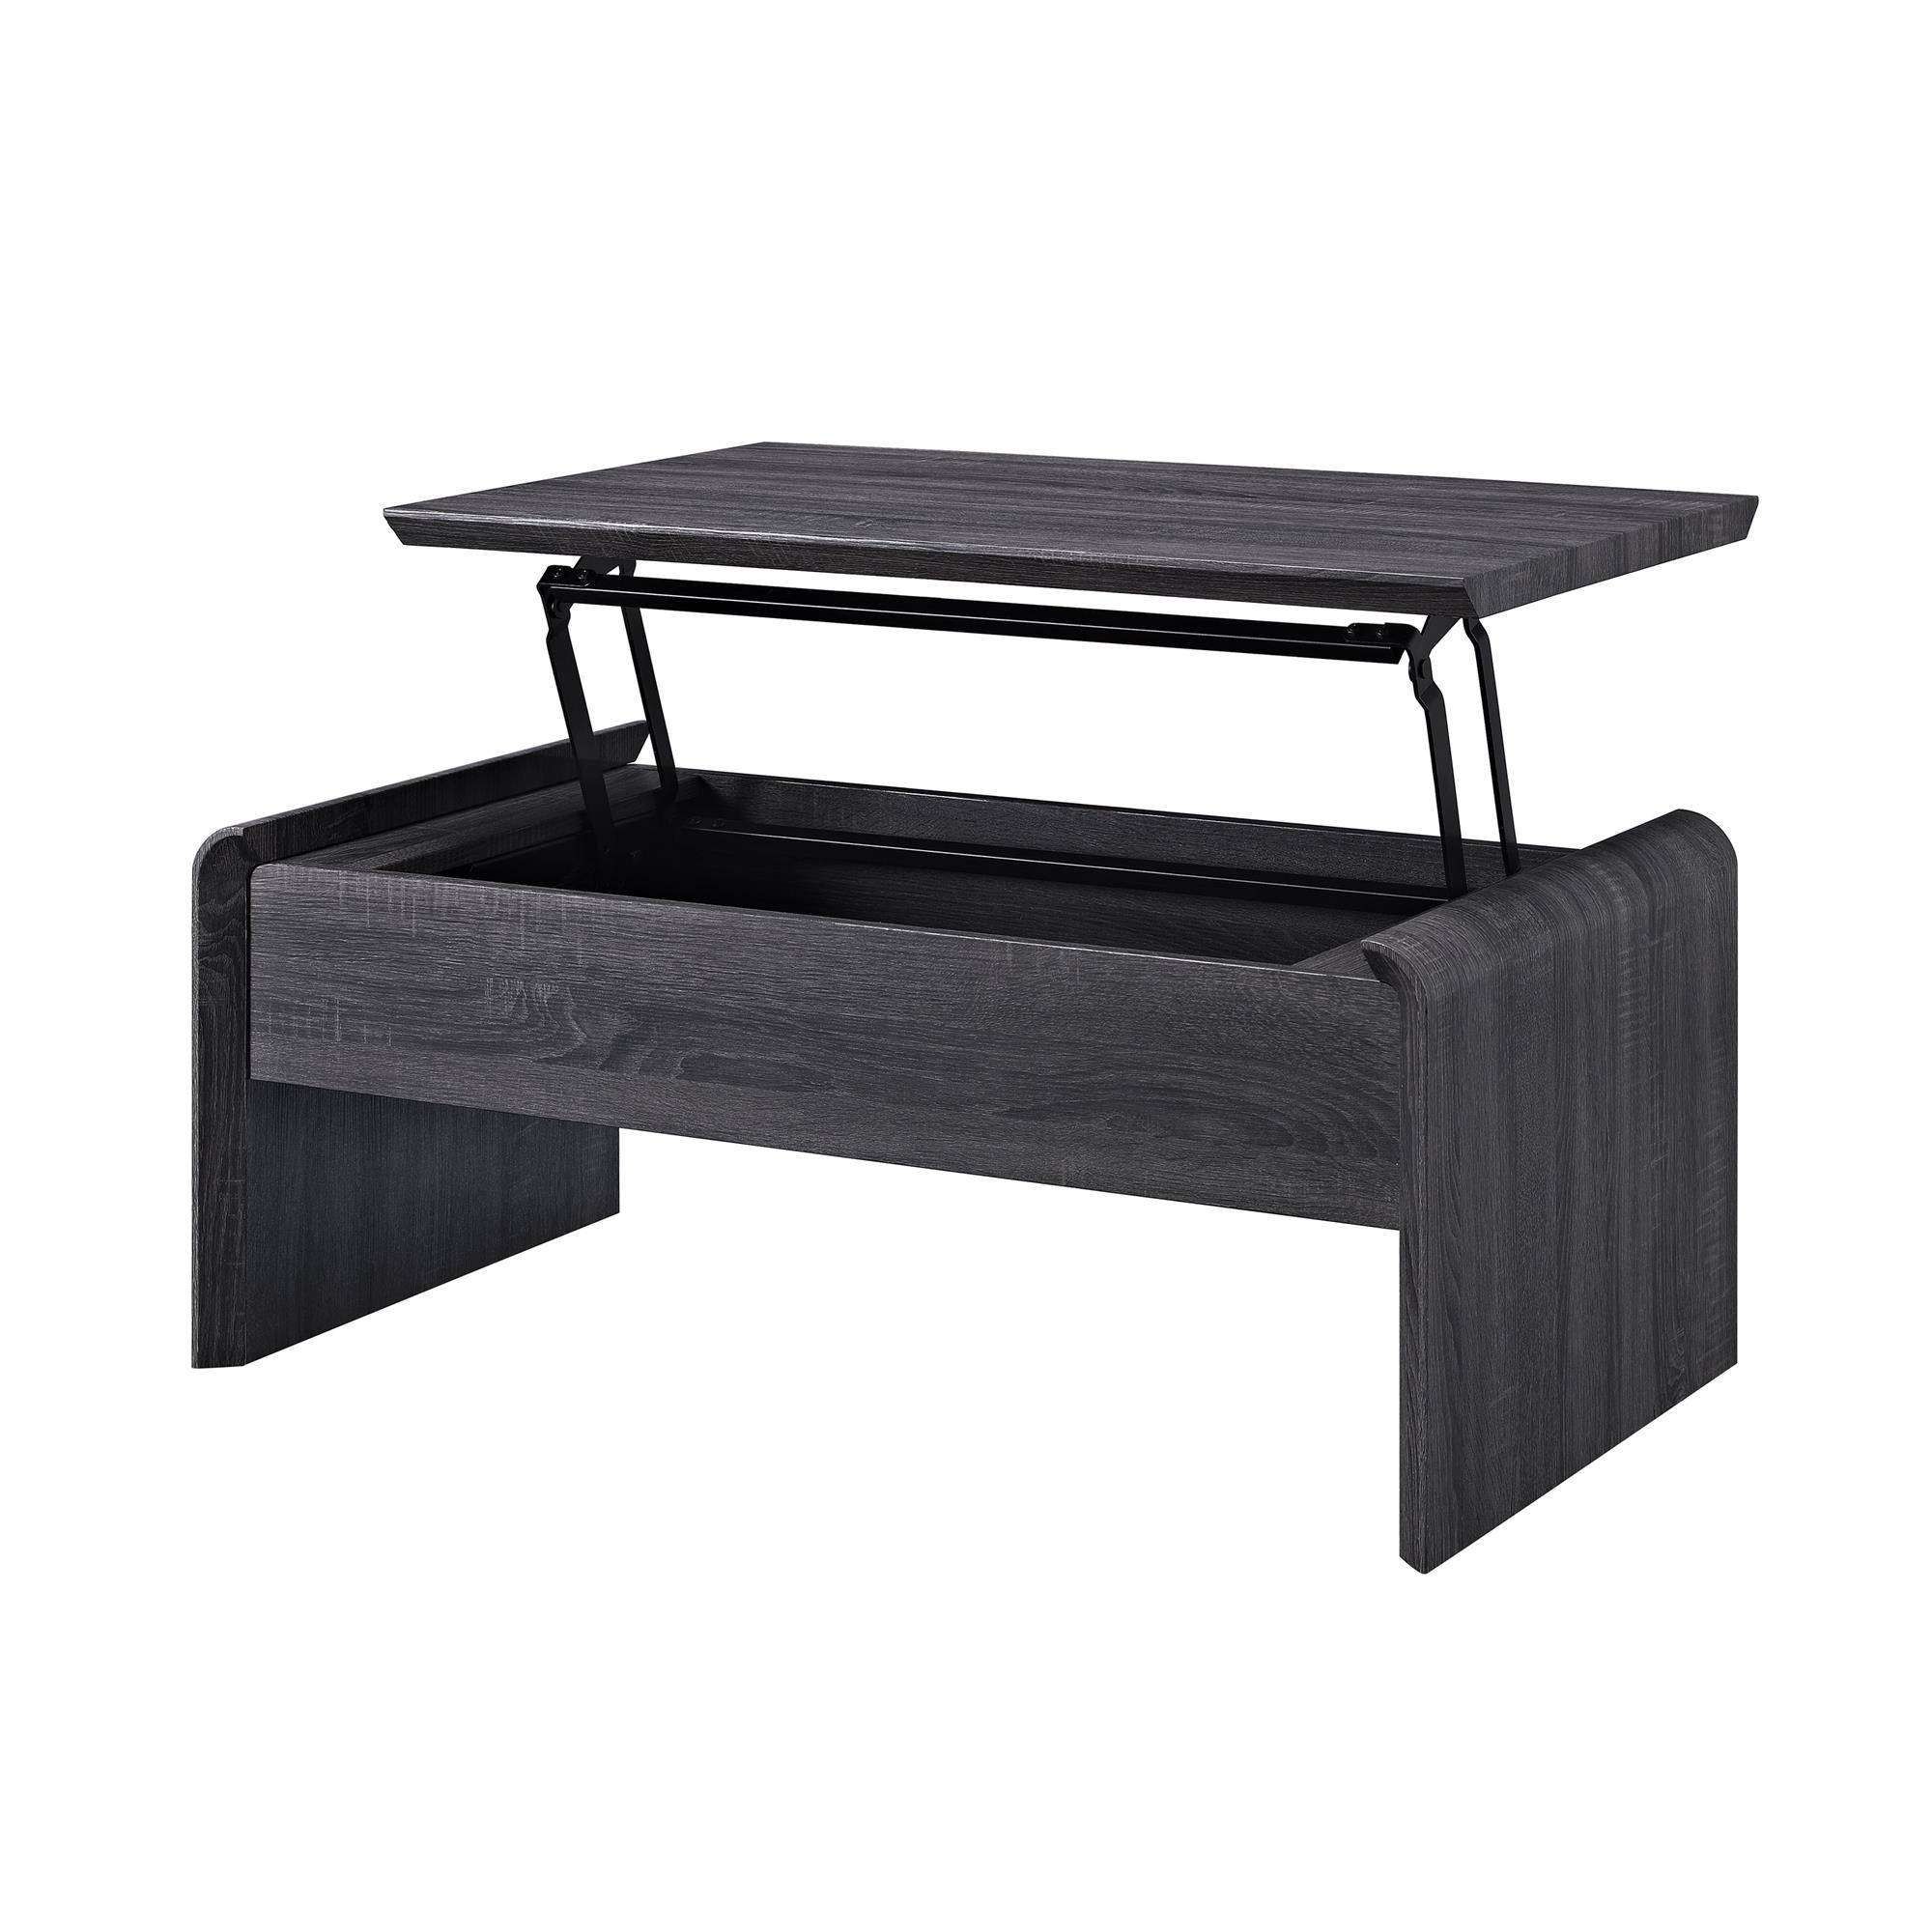 Collection Waverly Lift Top Coffee Table – Mediasupload Throughout Well Known Waverly Lift Top Coffee Tables (View 7 of 20)